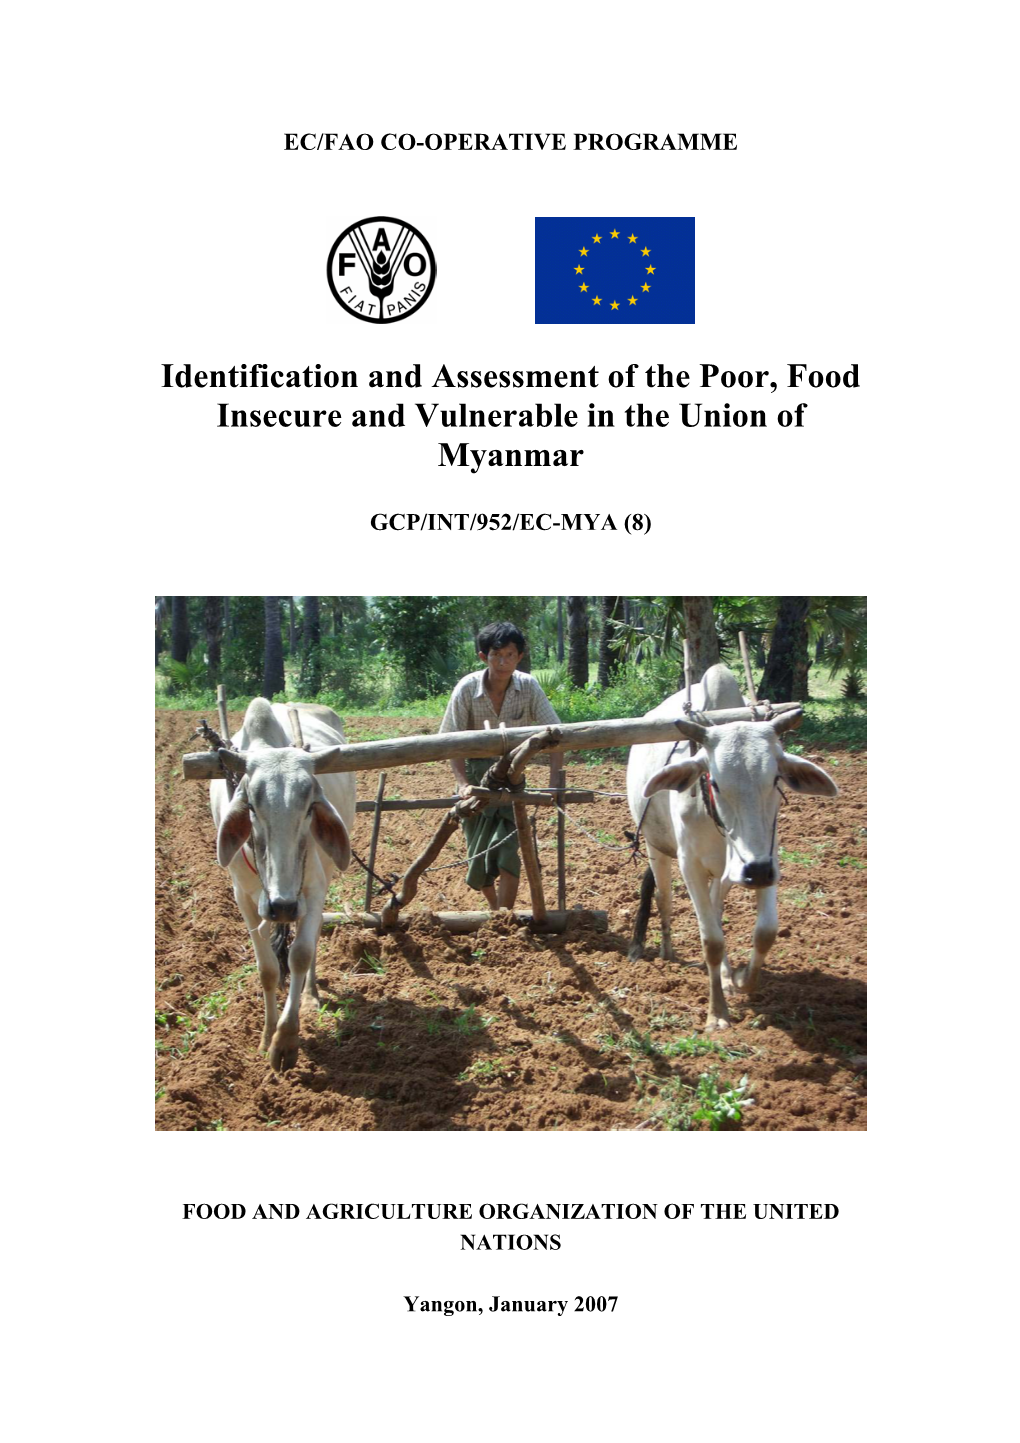 Identification and Assessment of the Poor, Food Insecure and Vulnerable in the Union of Myanmar